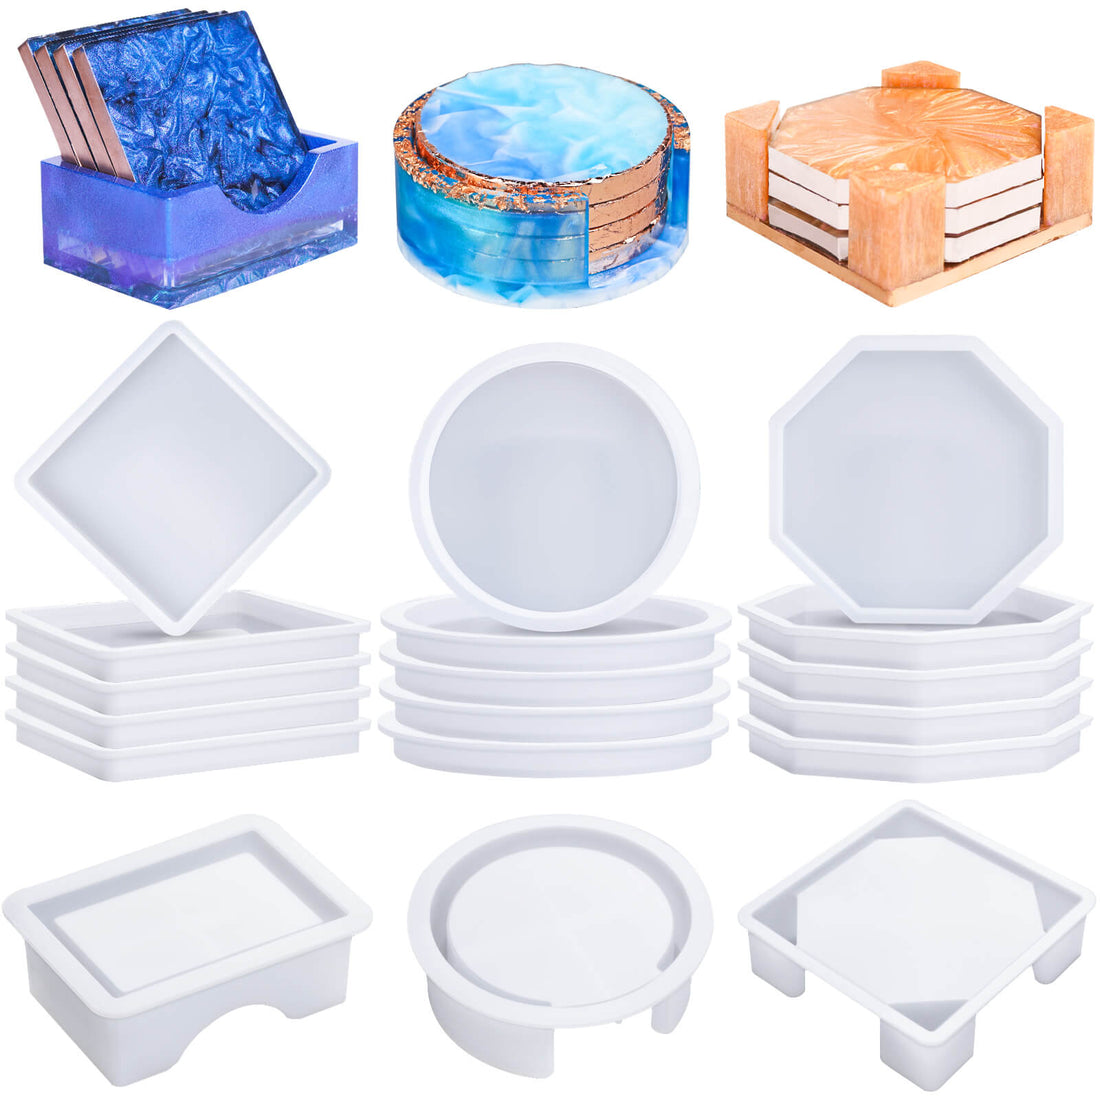 LET'S RESIN Coaster Resin Molds, Upgraded 10pcs Epoxy Molds Holder Kit with  5 Plastic Dropper 5 Wooden Sticks 2 Gloves, Sturdy Silicone Molds for